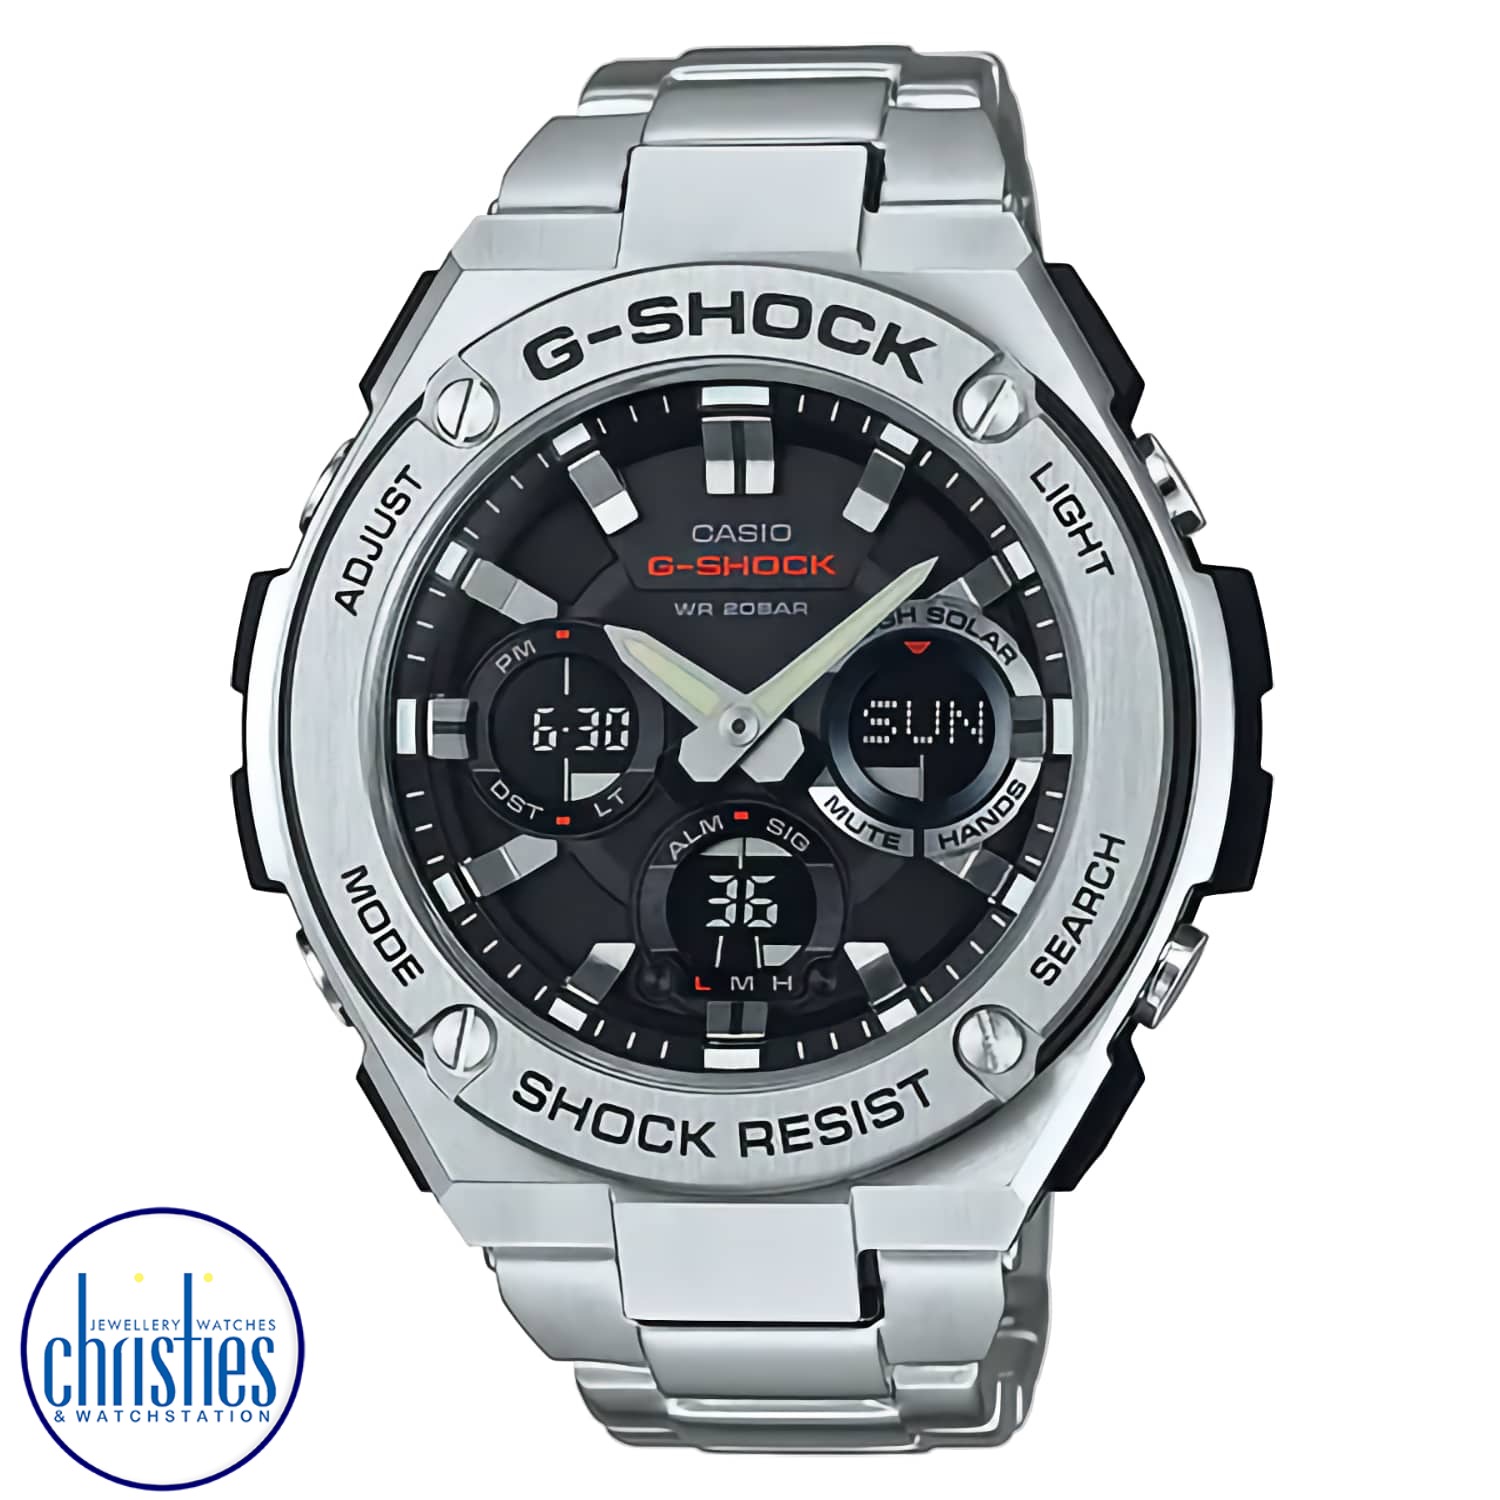 GSTS110D-1A G-Shock G-STEEL Watch. From G-SHOCK, the watch brand that is constantly setting new standards for timekeeping toughness, comes G-STEEL, a watch series with a new "layer guard structure". g shock watches price